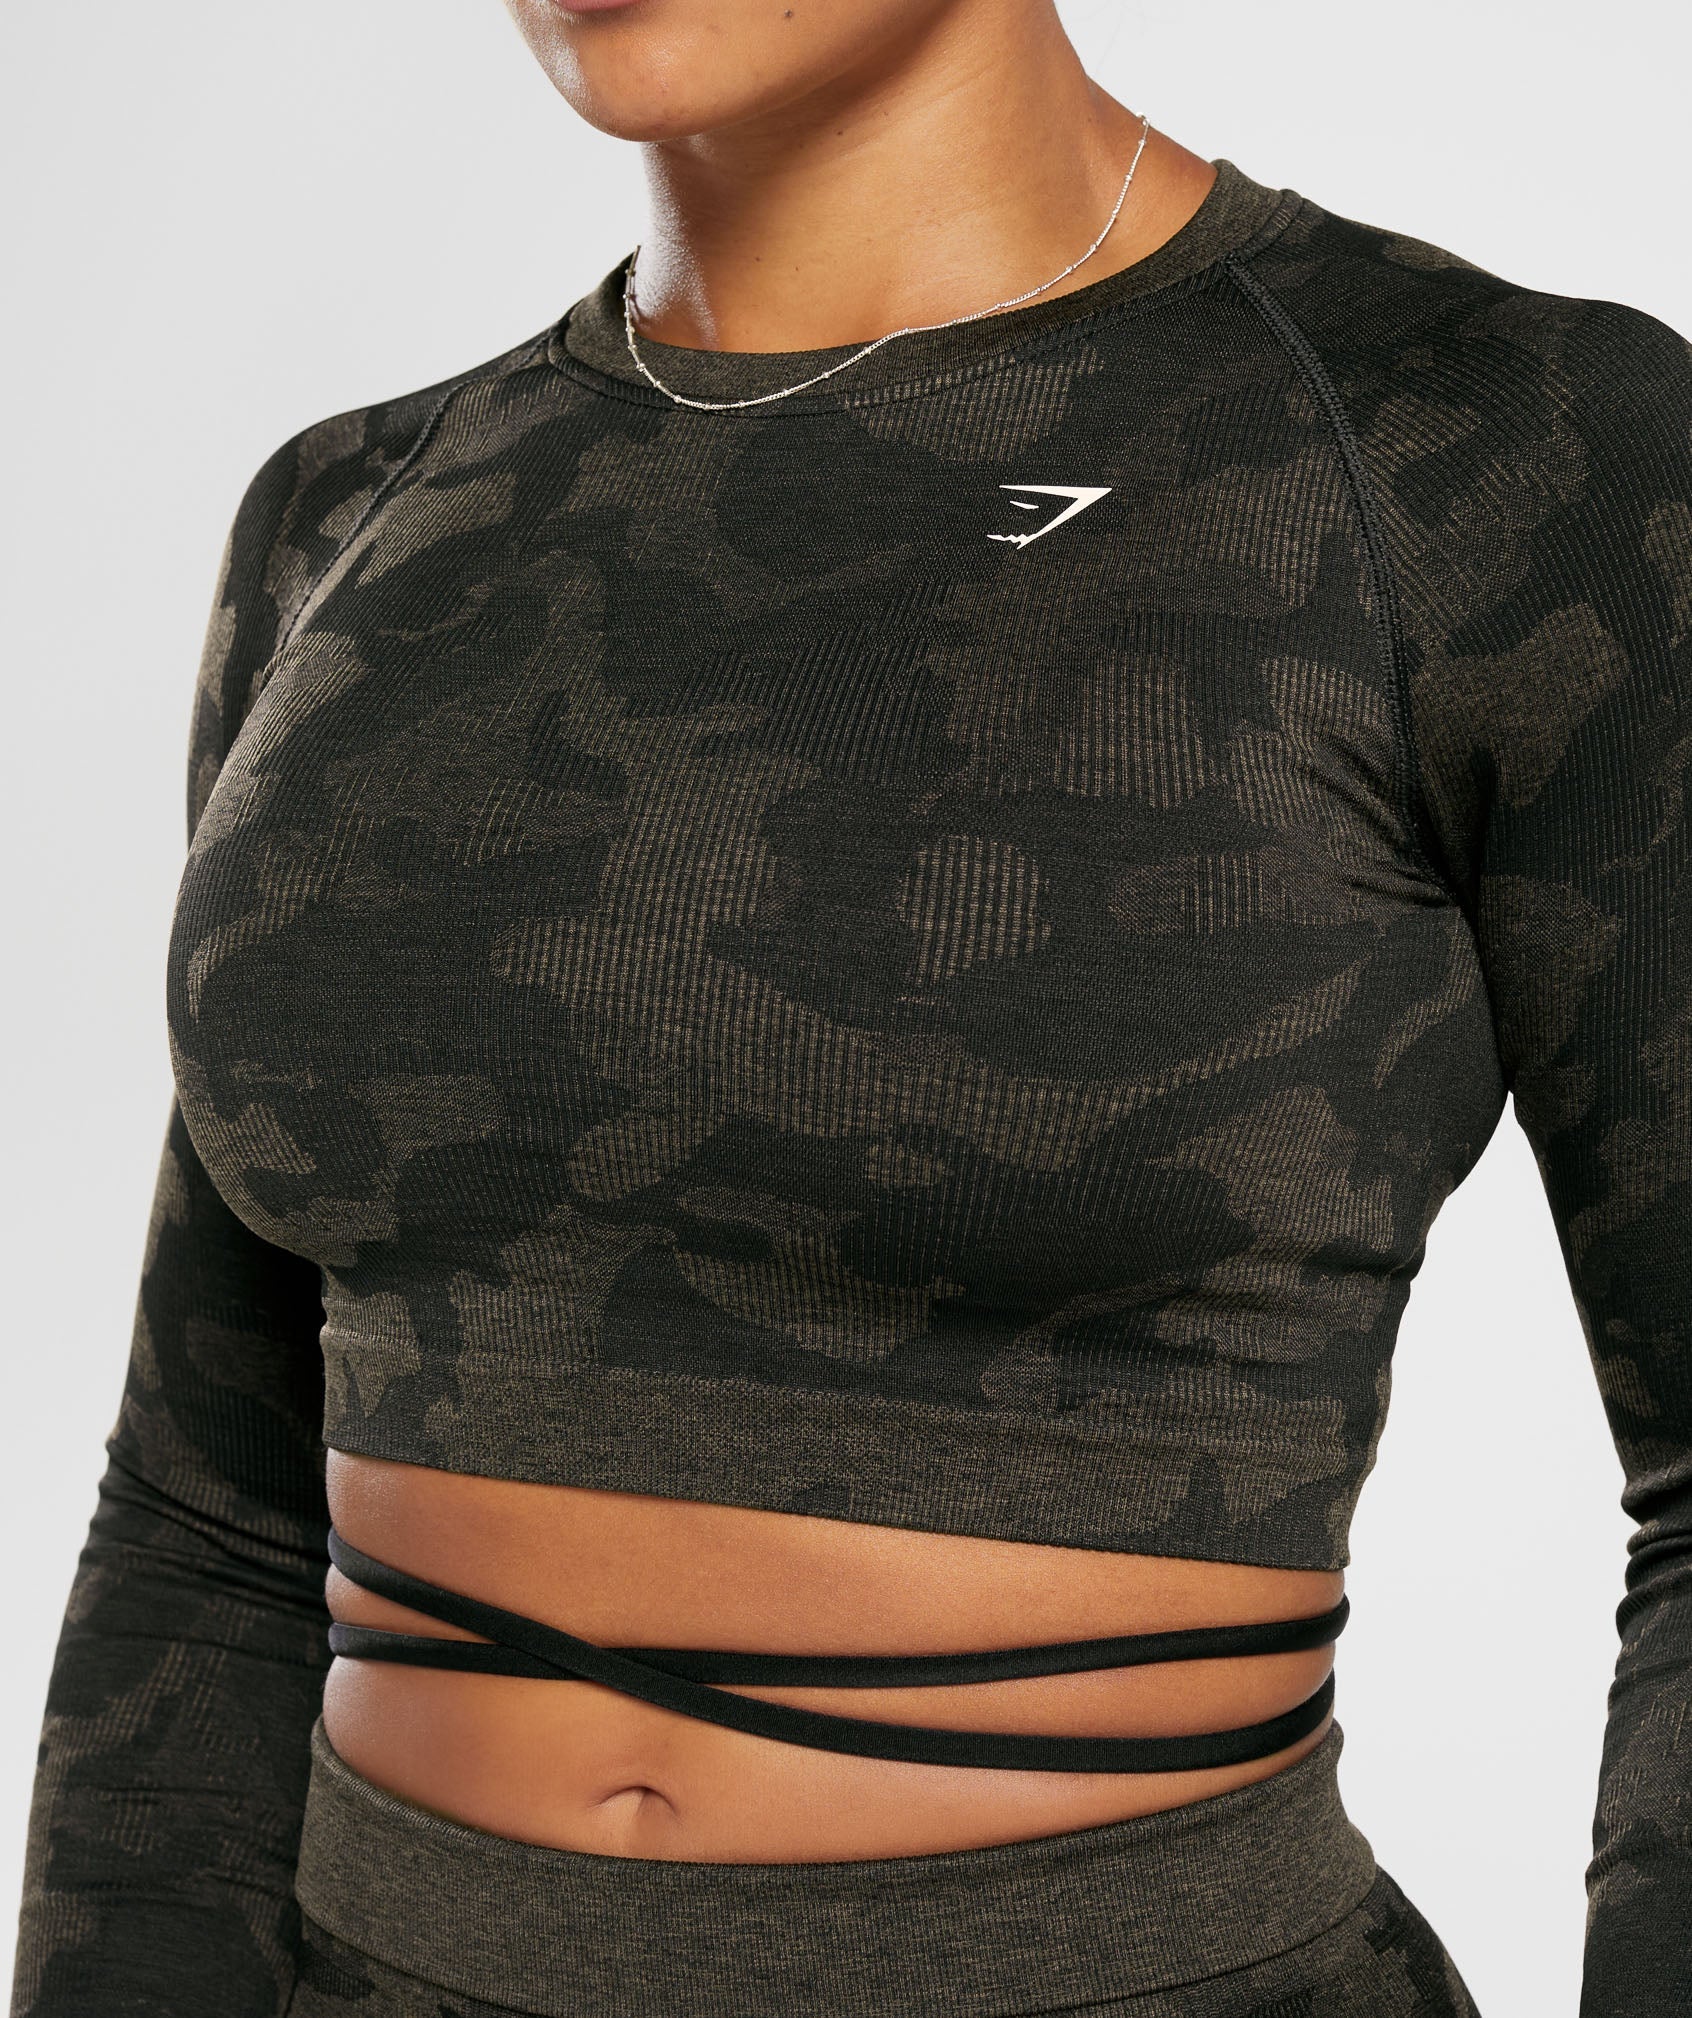 Adapt Camo Seamless Ribbed Long Sleeve Crop Top in Black/Camo Brown - view 5